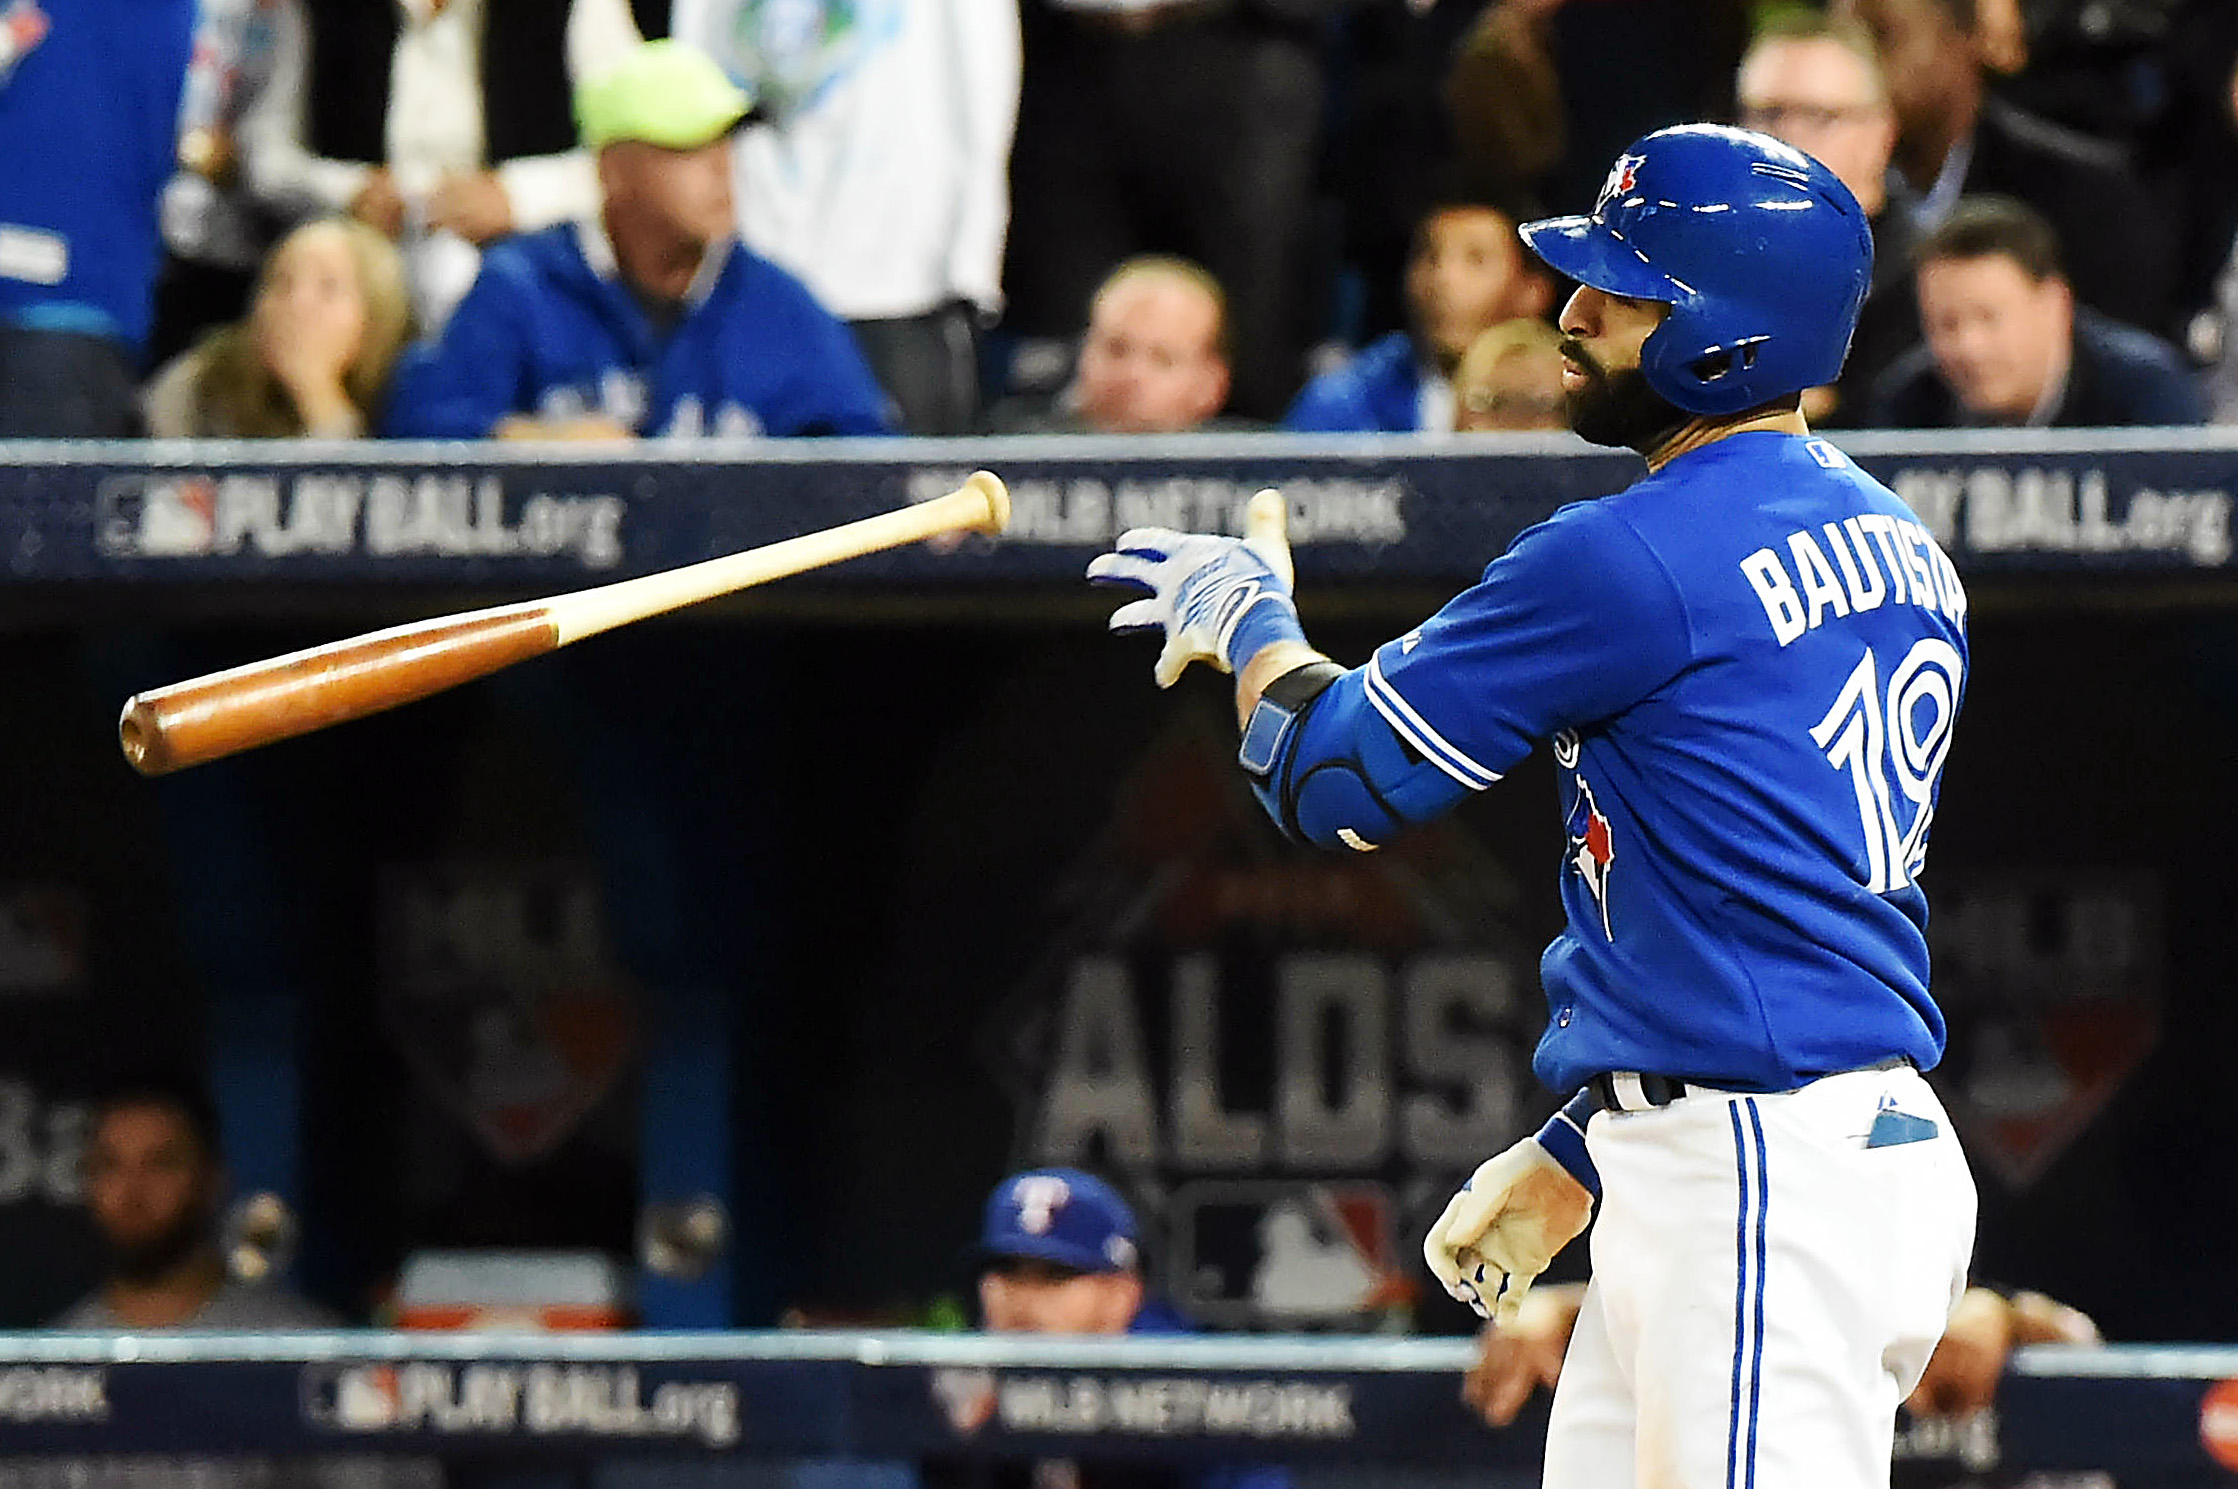 What, you didn't think I would post a piece about the Blue Jays and NOT use the BAT FLIP pic did you?